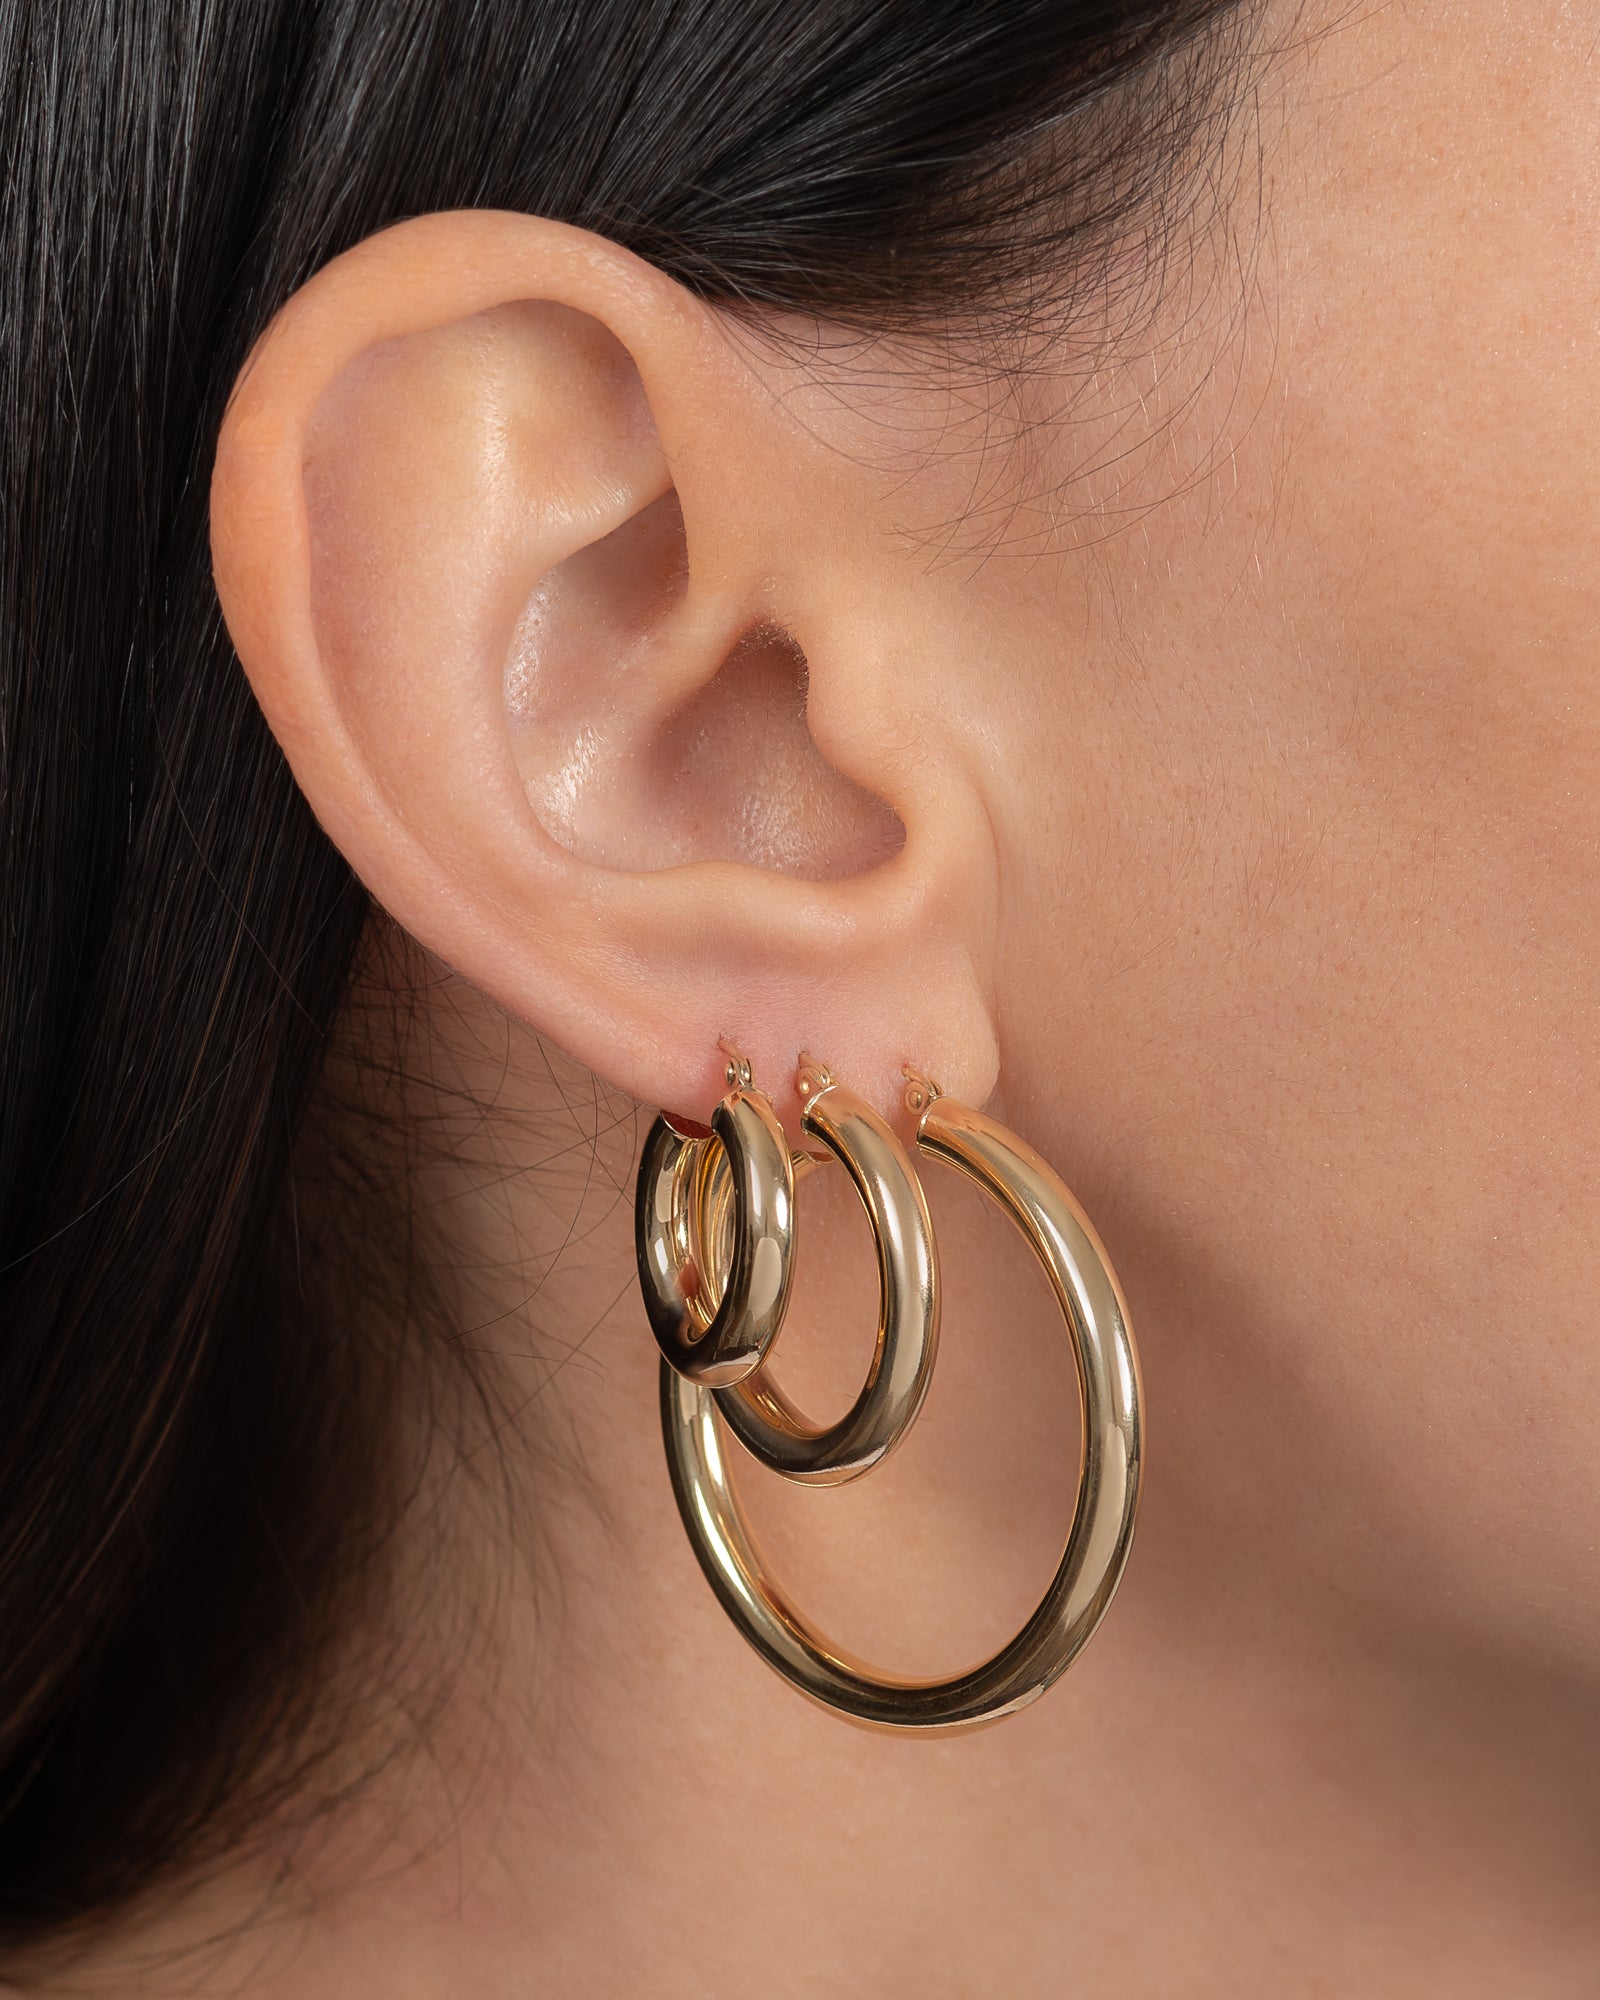 Chunky Gold Hoop Earrings Thick Gold Hoops Gold Hoop Earrings Huggie Earrings  Small Hoop Earrings Chunky Gold Hoops Mini Creolen - Etsy | Hoop earrings  small, Gold hoop earrings, Thick gold hoop earrings